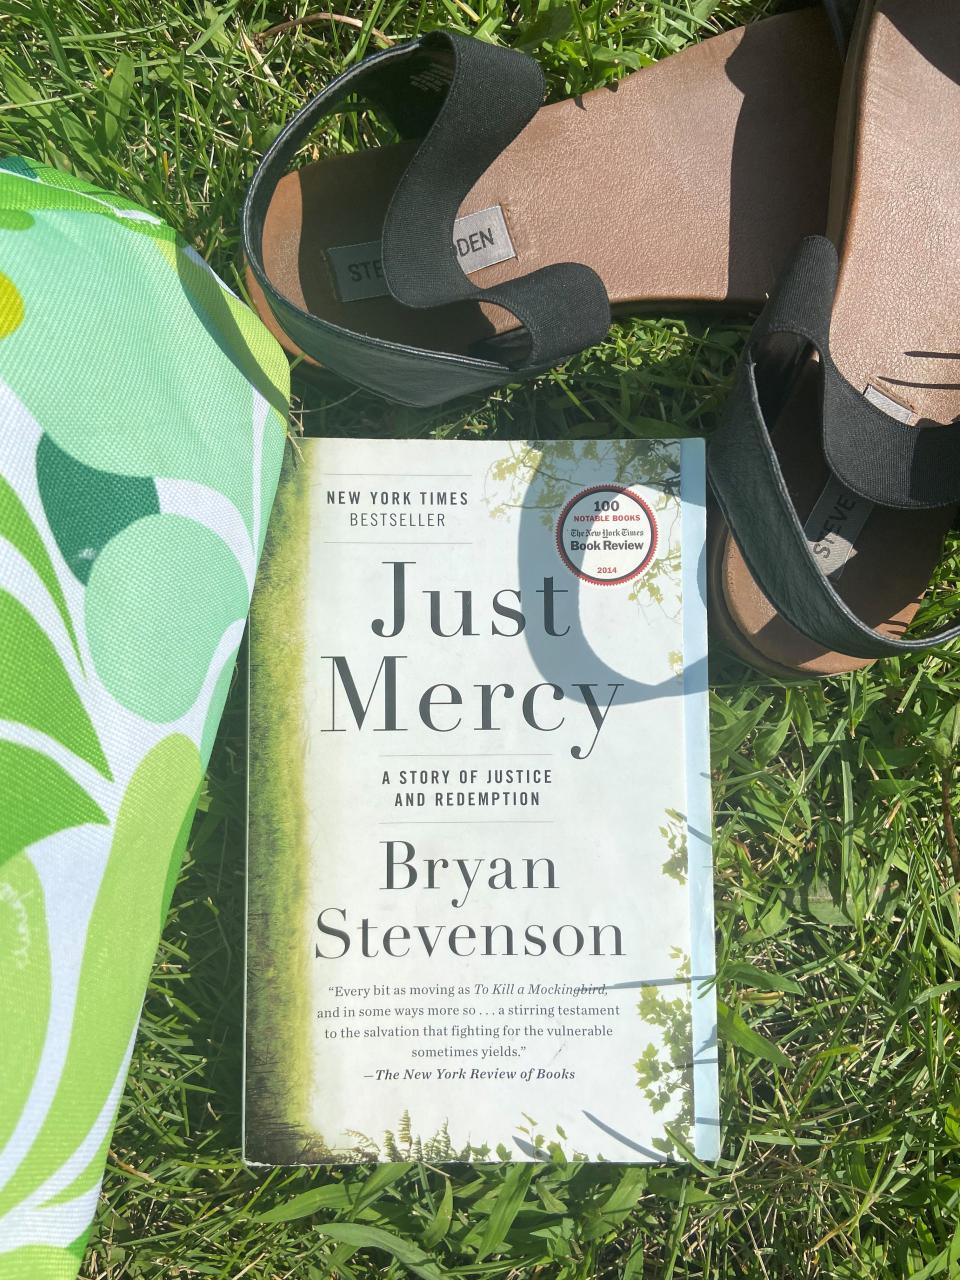 If reading isn't your style watch the 2019 "Just Mercy" movie with Michael B. Jordan instead!